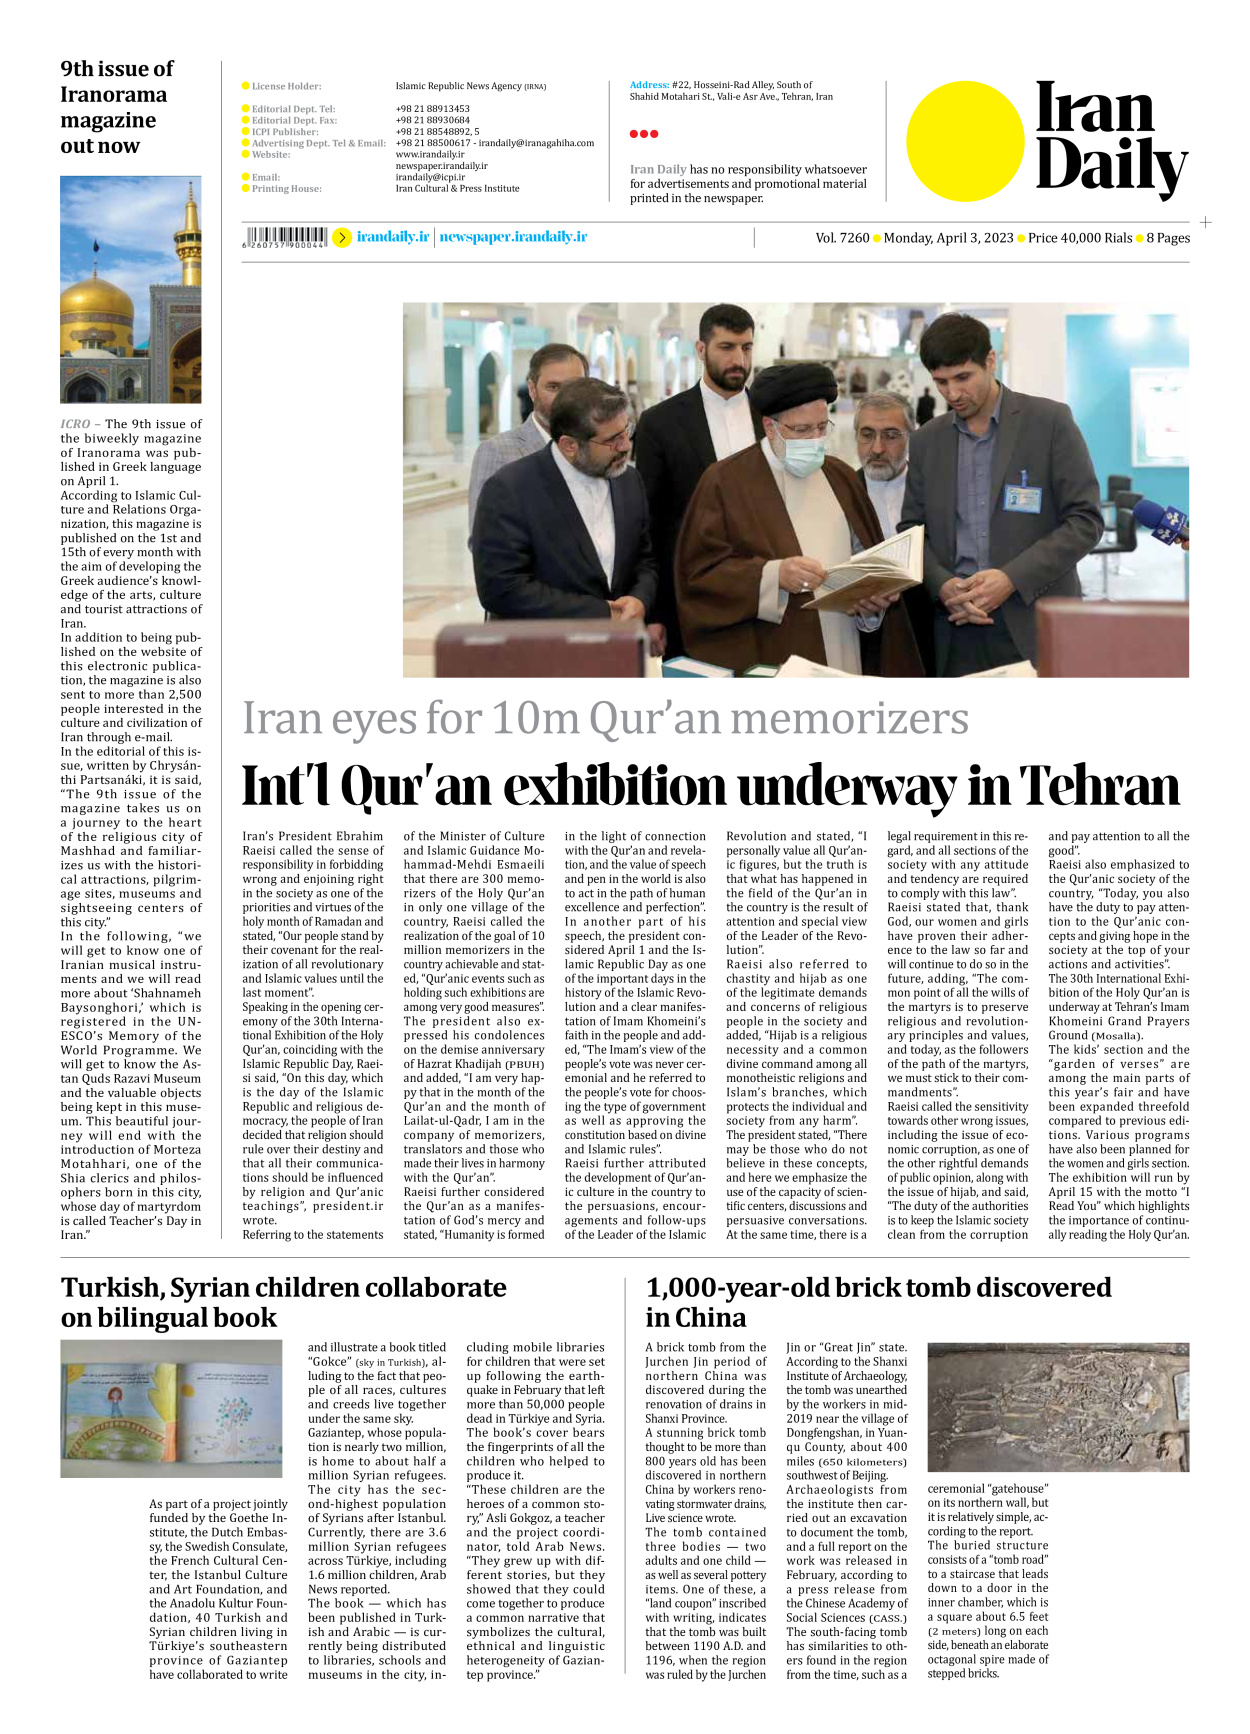 Iran Daily - Number Seven Thousand Two Hundred and Sixty - 03 April 2023 - Page 8